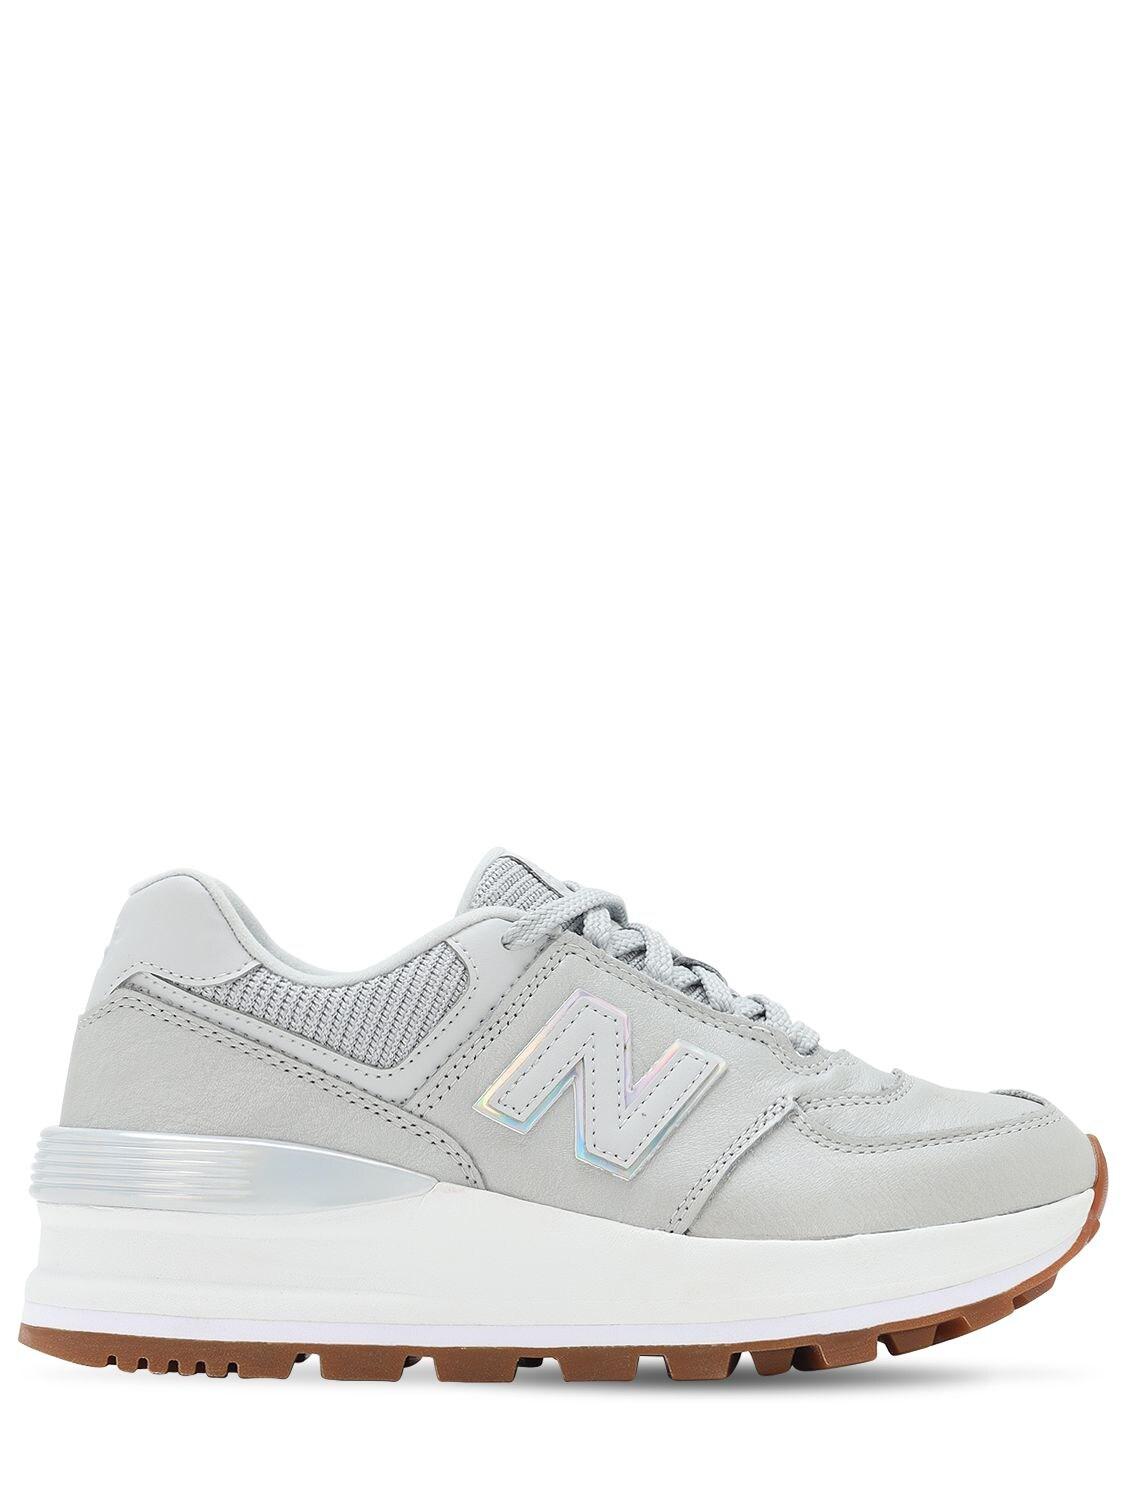 New Balance 574 Platform Sneakers in Gray | Lyst